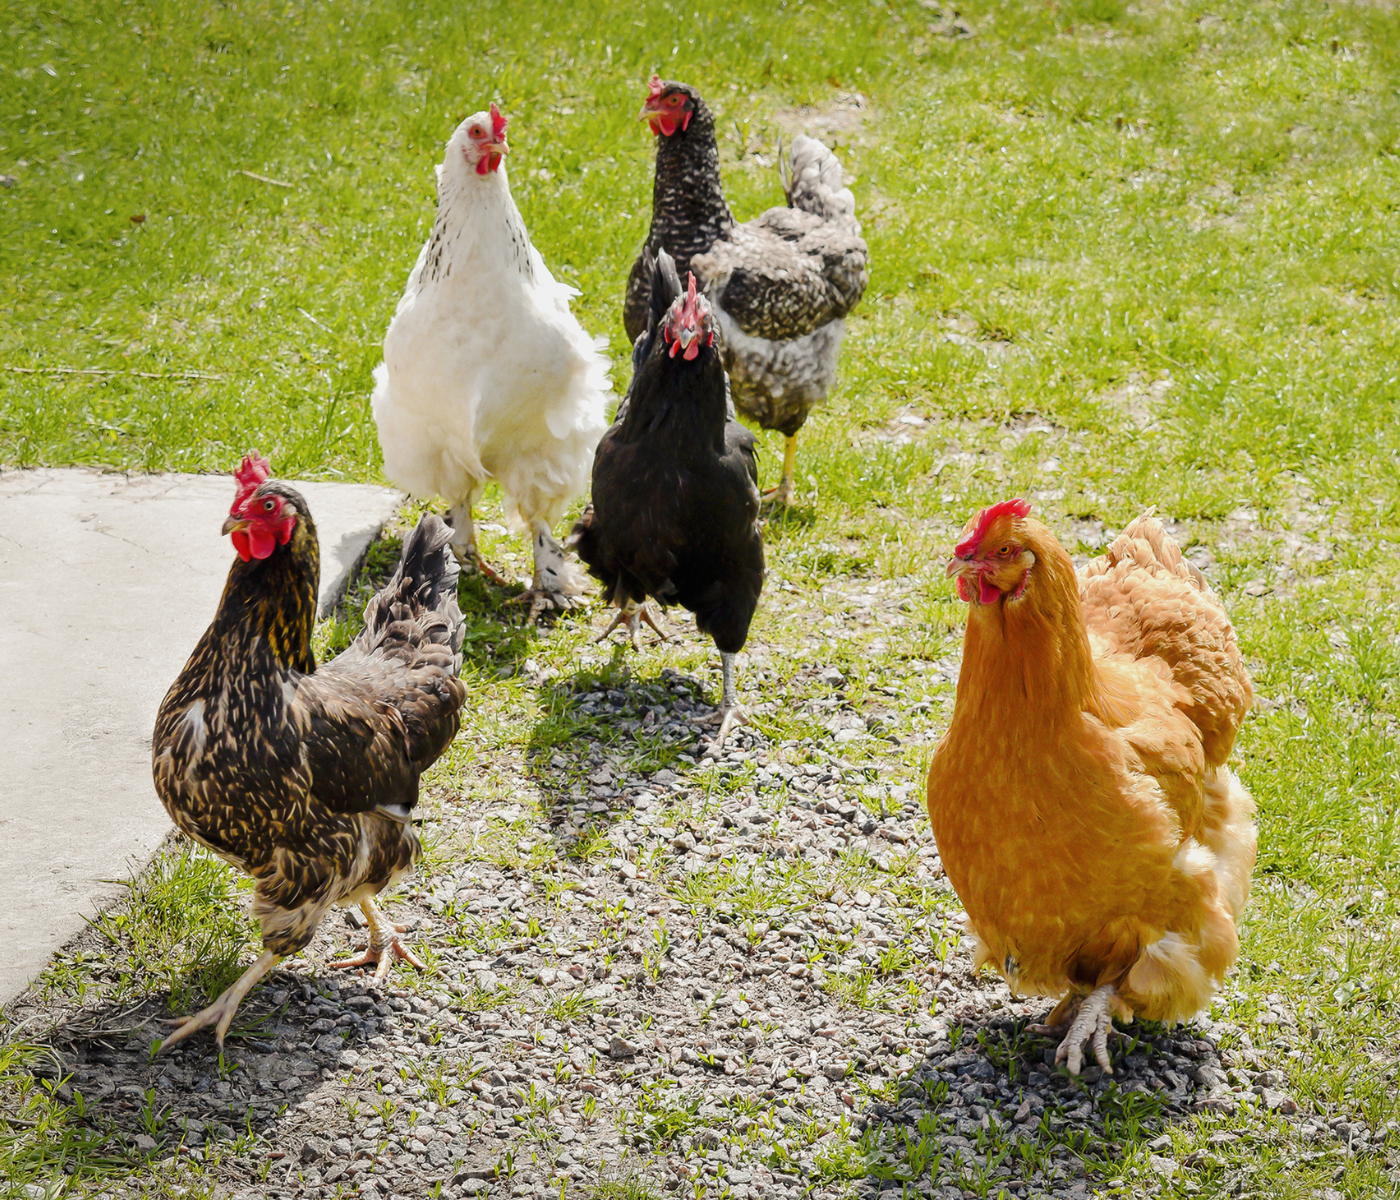 Backyard poultry could be causing Salmonella in the U.S.